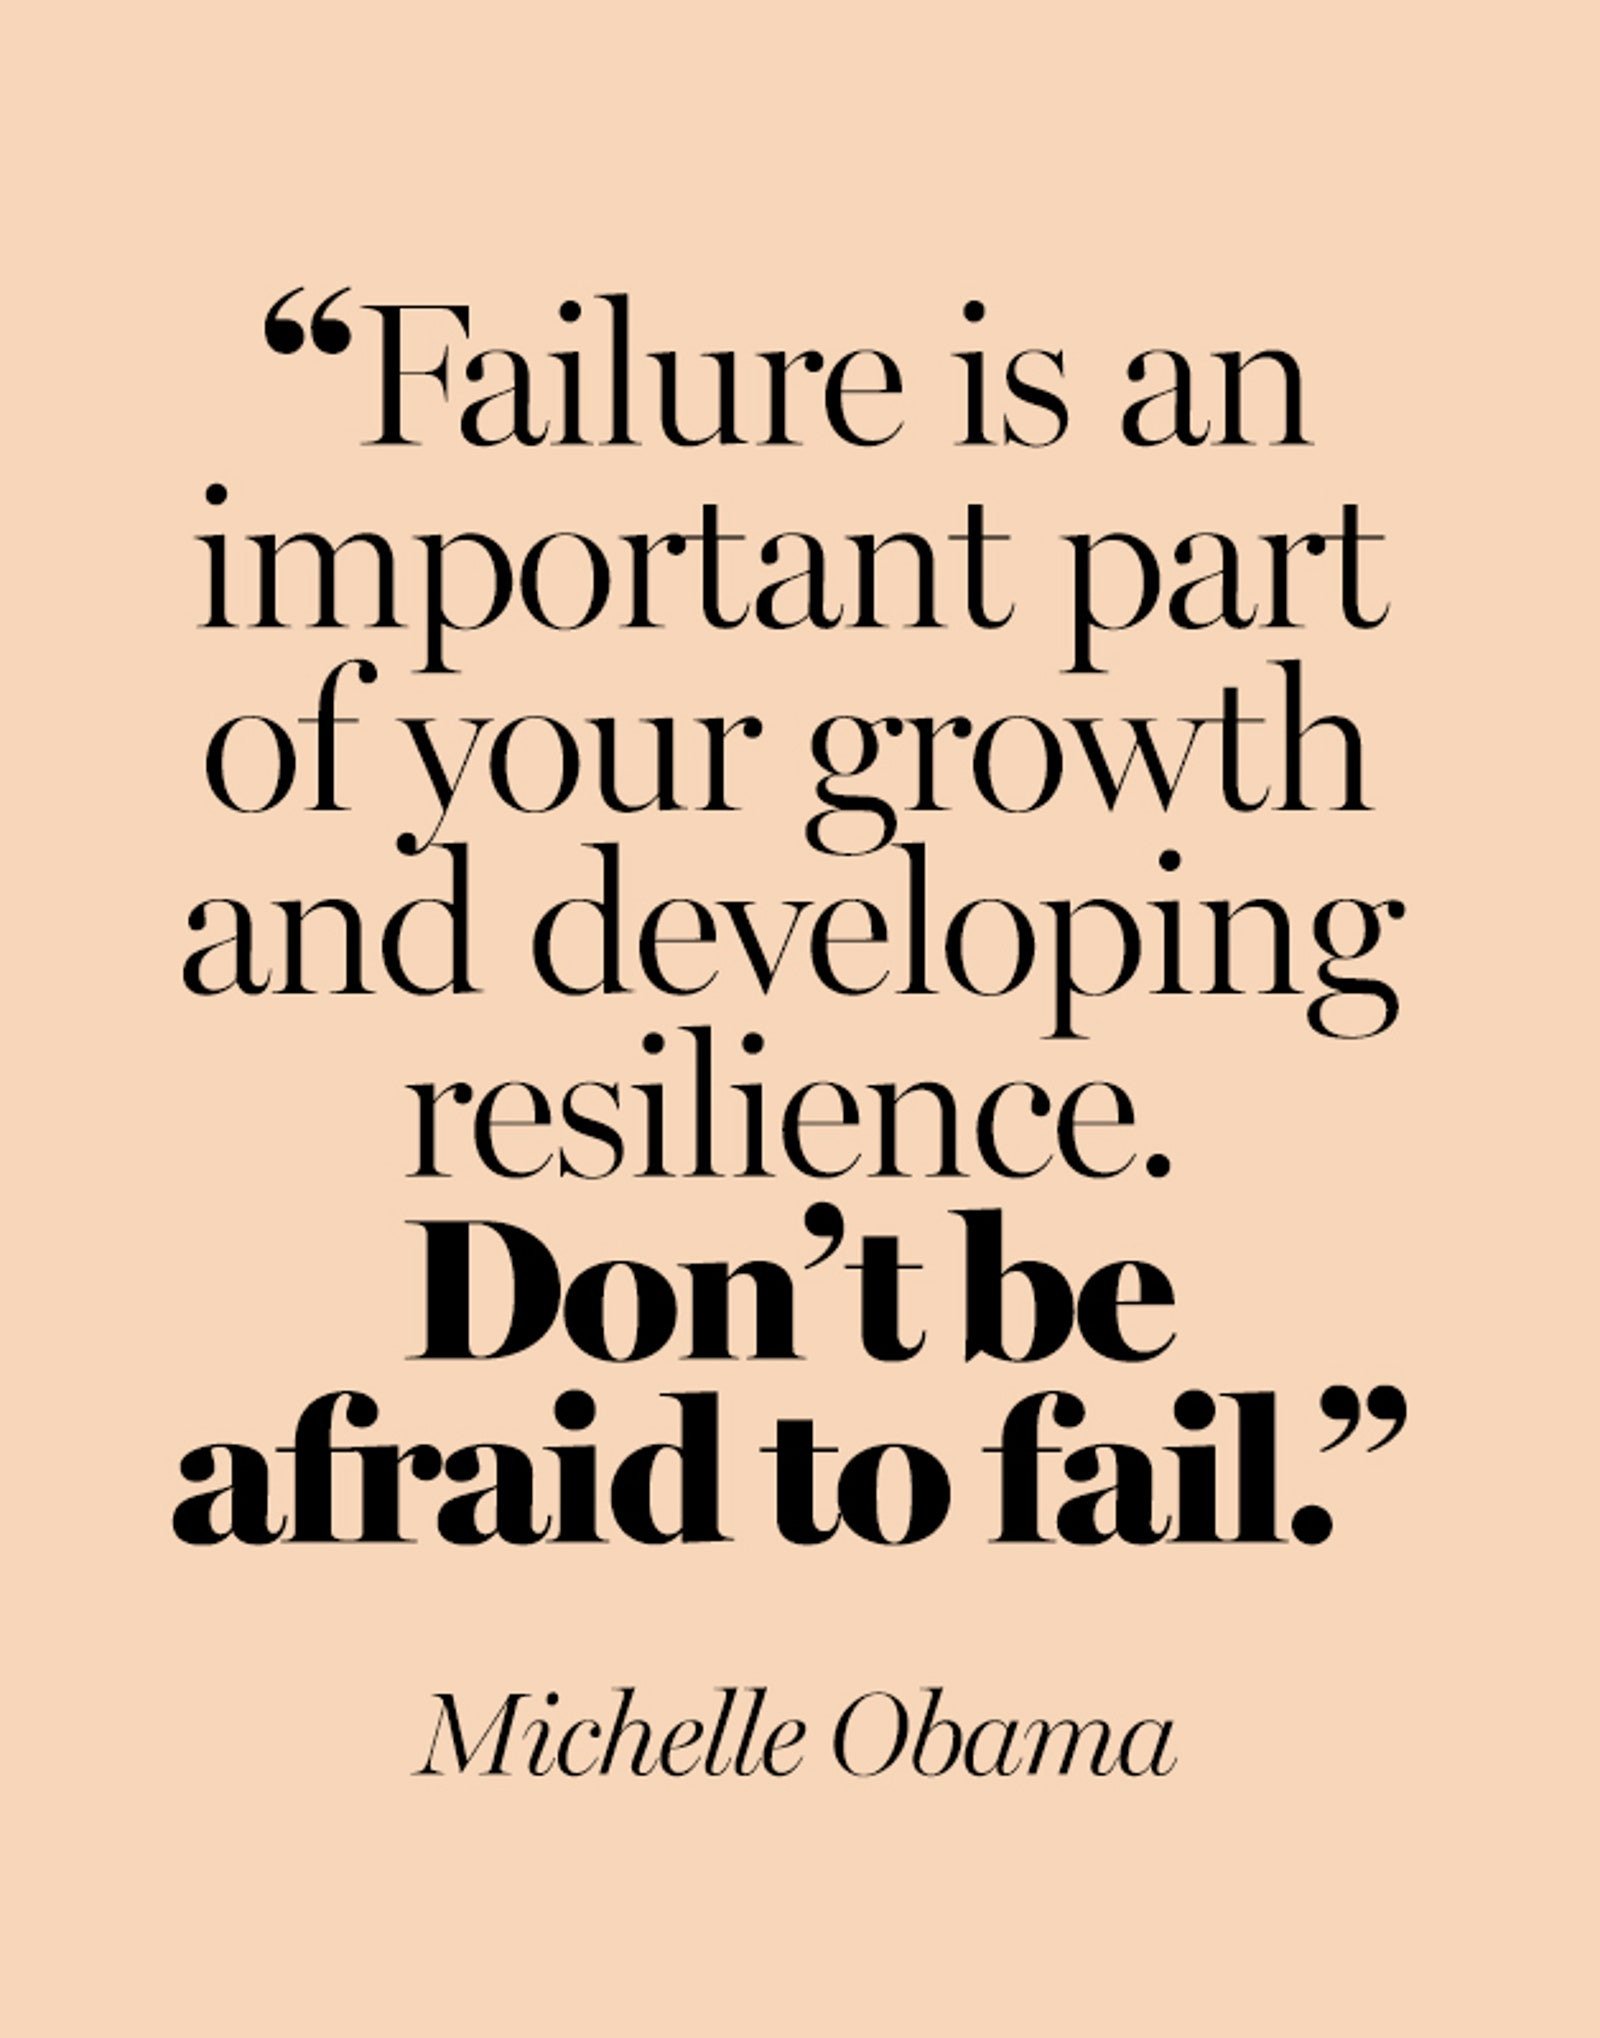 Michelle Obama Education Quotes
 10 Michelle Obama Quotes We Need Now More Than Ever Glamour